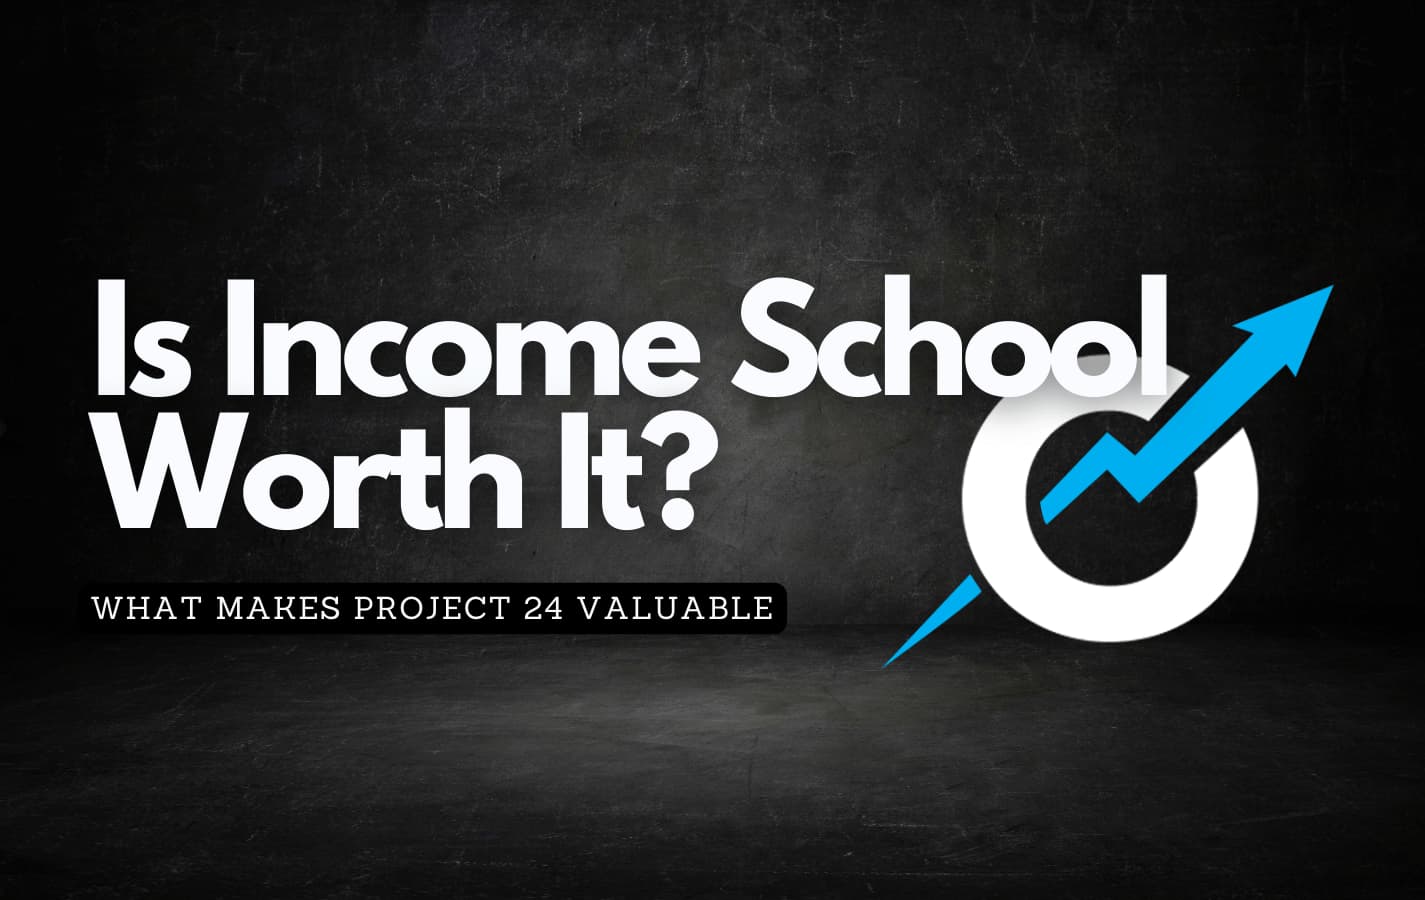 Income School logo against a dark background with the text talking about whether income schools course is worth the investment